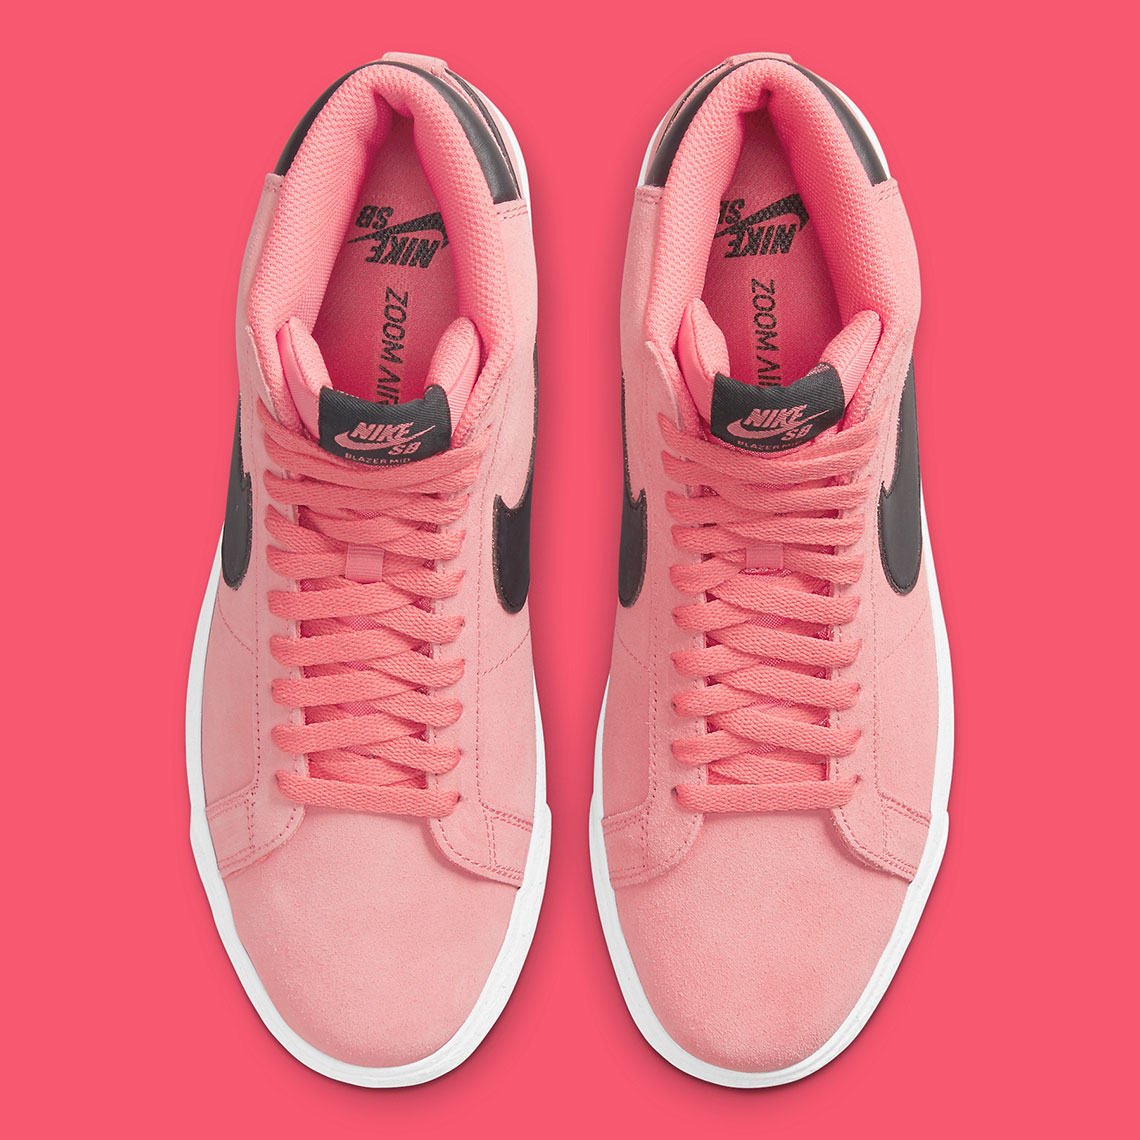 The Nike Blazer Low Bubble-Gum Pink Is Super Sweet 